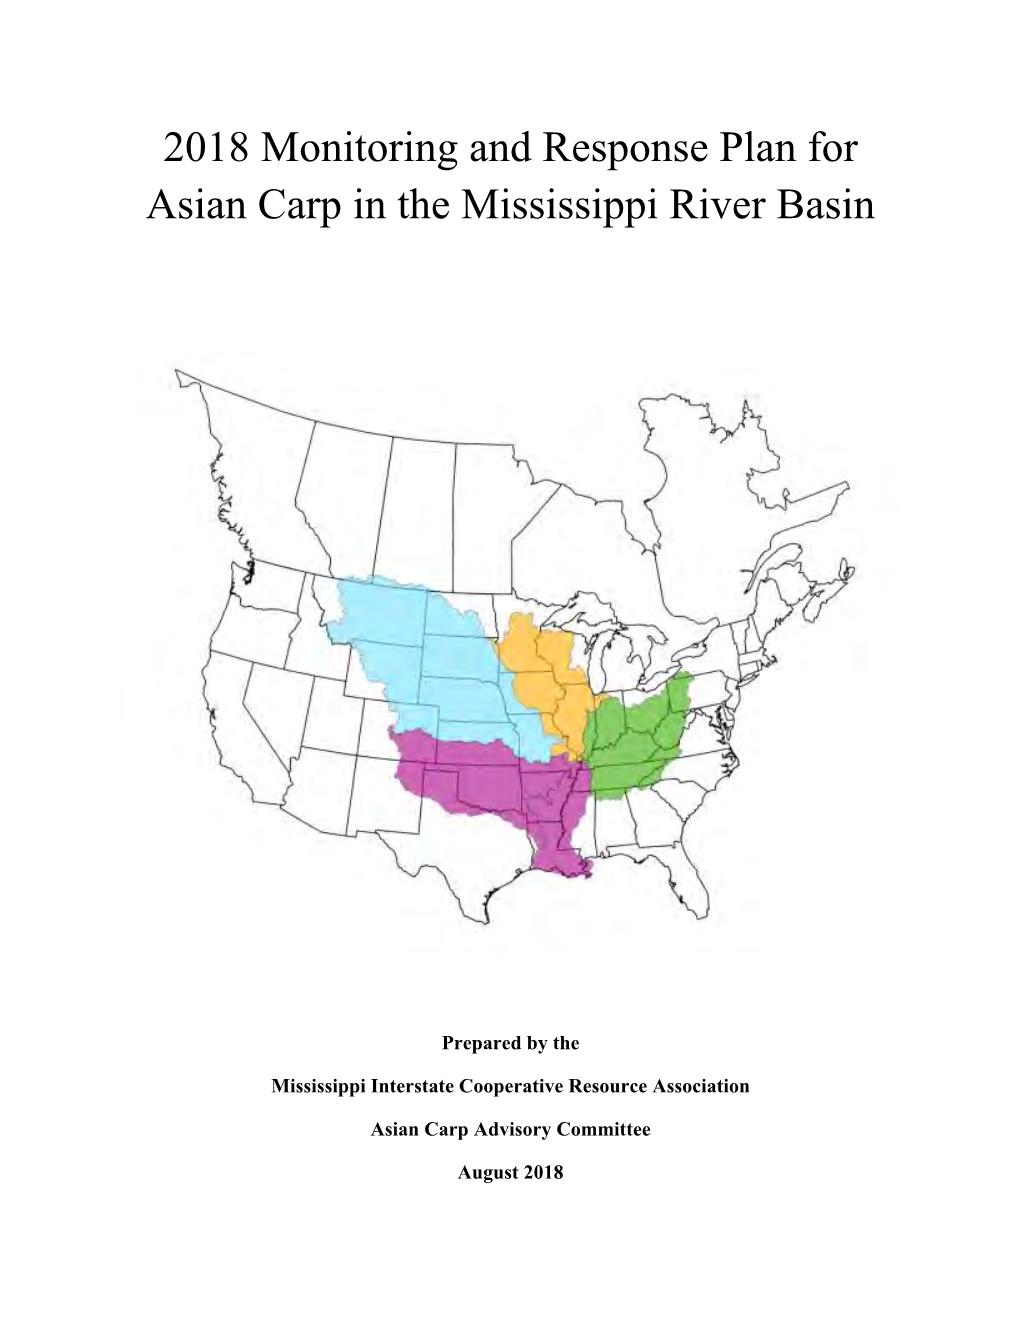 2018 Monitoring and Response Plan for Asian Carp in the Mississippi River Basin